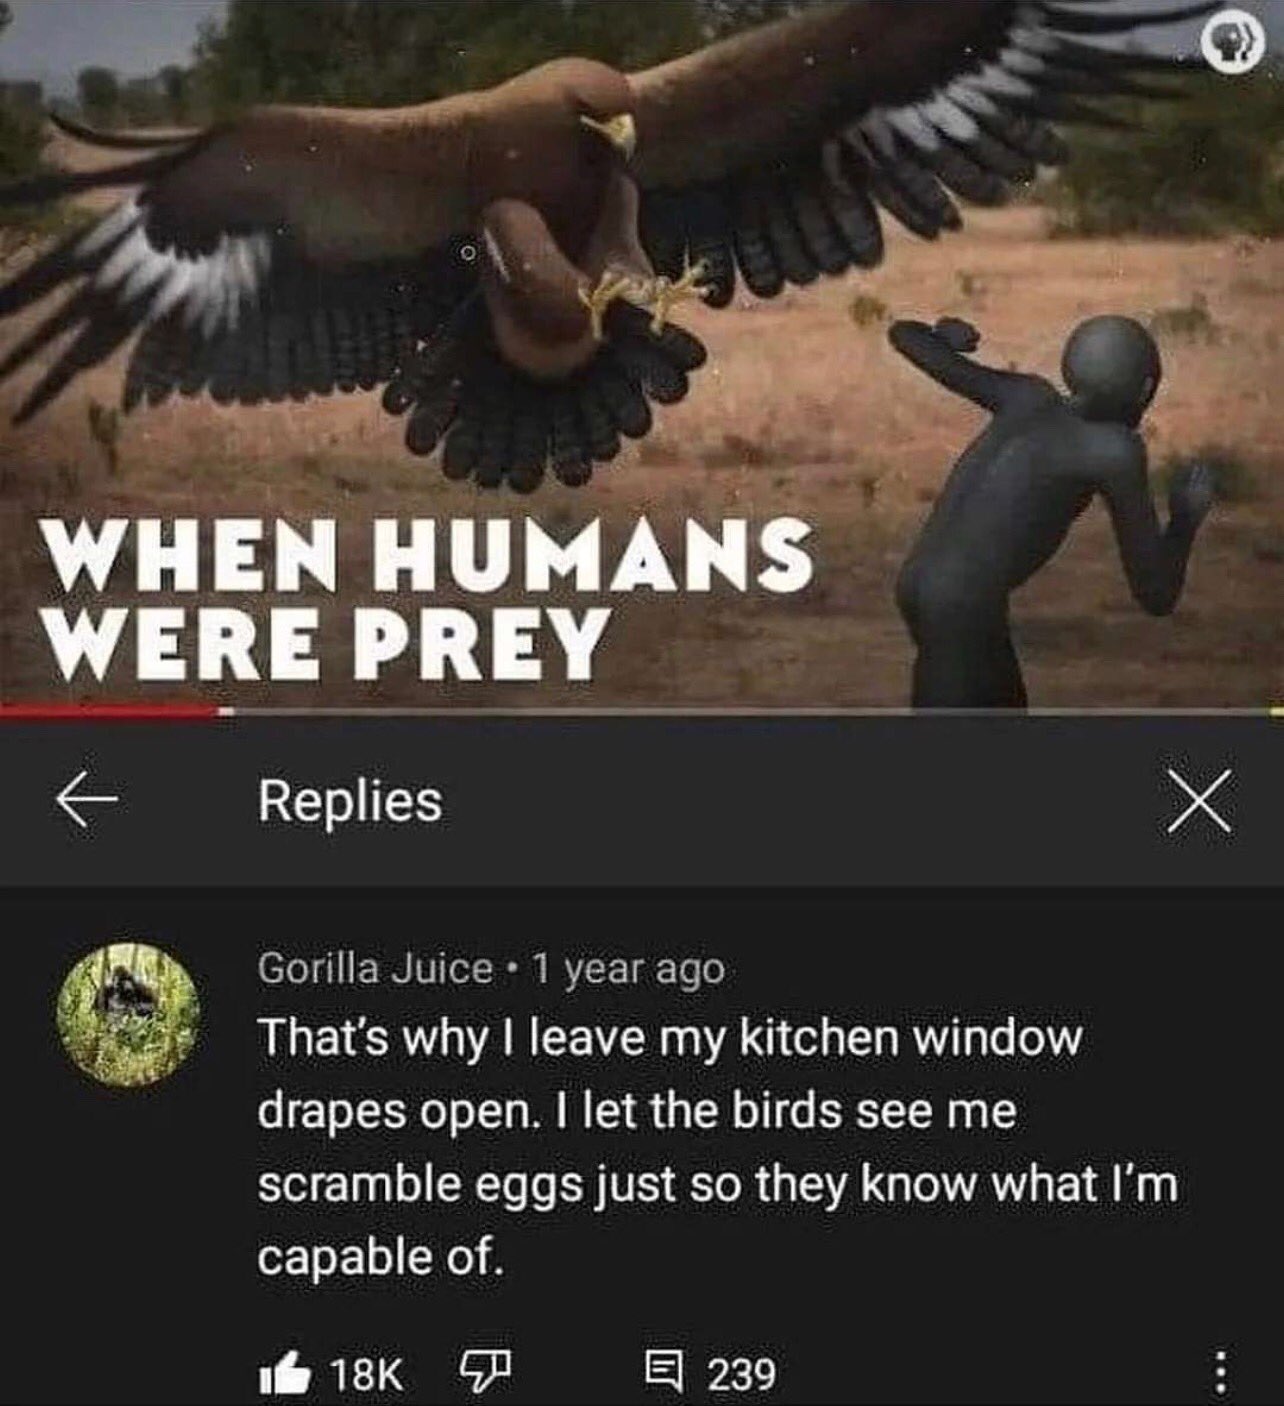 funny and savage youtube comments - humans were prey meme - When Humans Were Prey Replies x Gorilla Juice 1 year ago That's why I leave my kitchen window drapes open. I let the birds see me scramble eggs just so they know what I'm capable of. 18K 4 239